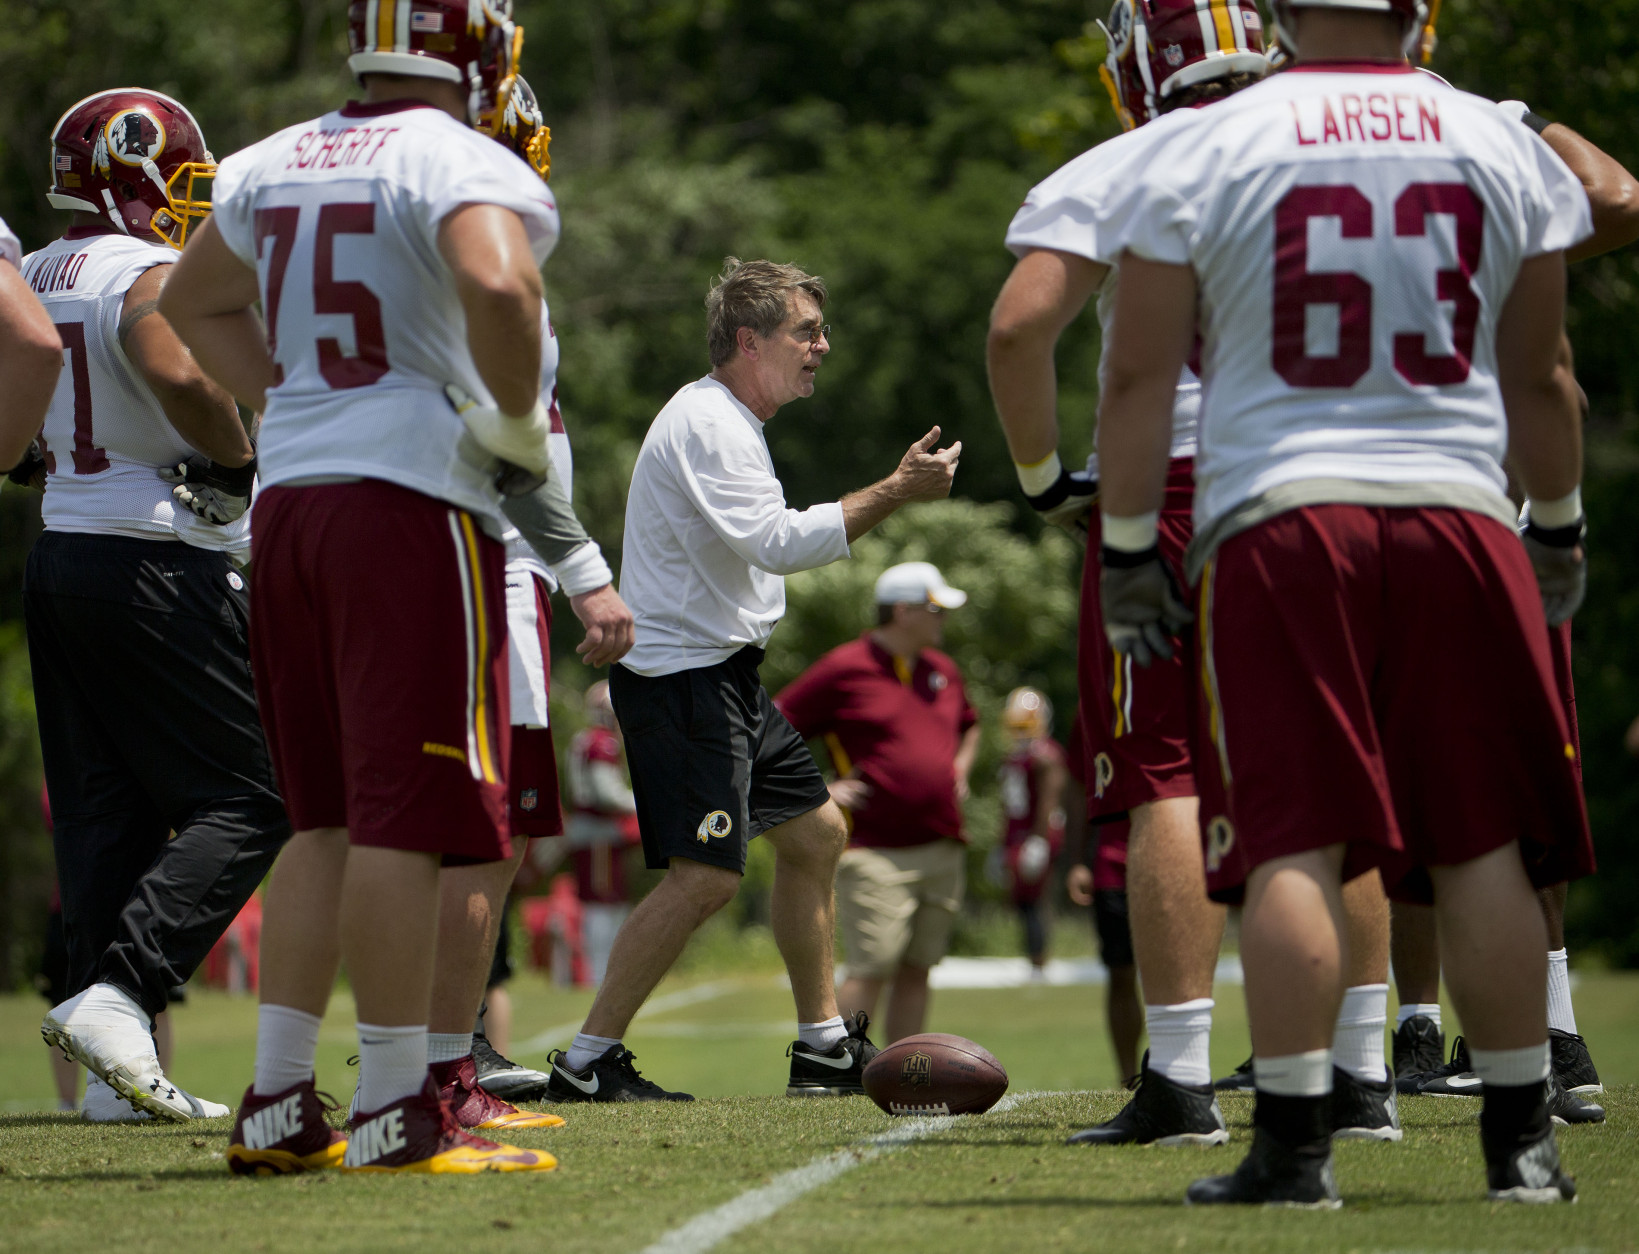 Washington Redskins offensive line coach Bill Callahan, center, works with players during NFL football minicamp at Redskins Park Tuesday, June 16, 2015 in Ashburn, Va. (AP Photo/Pablo Martinez Monsivais)